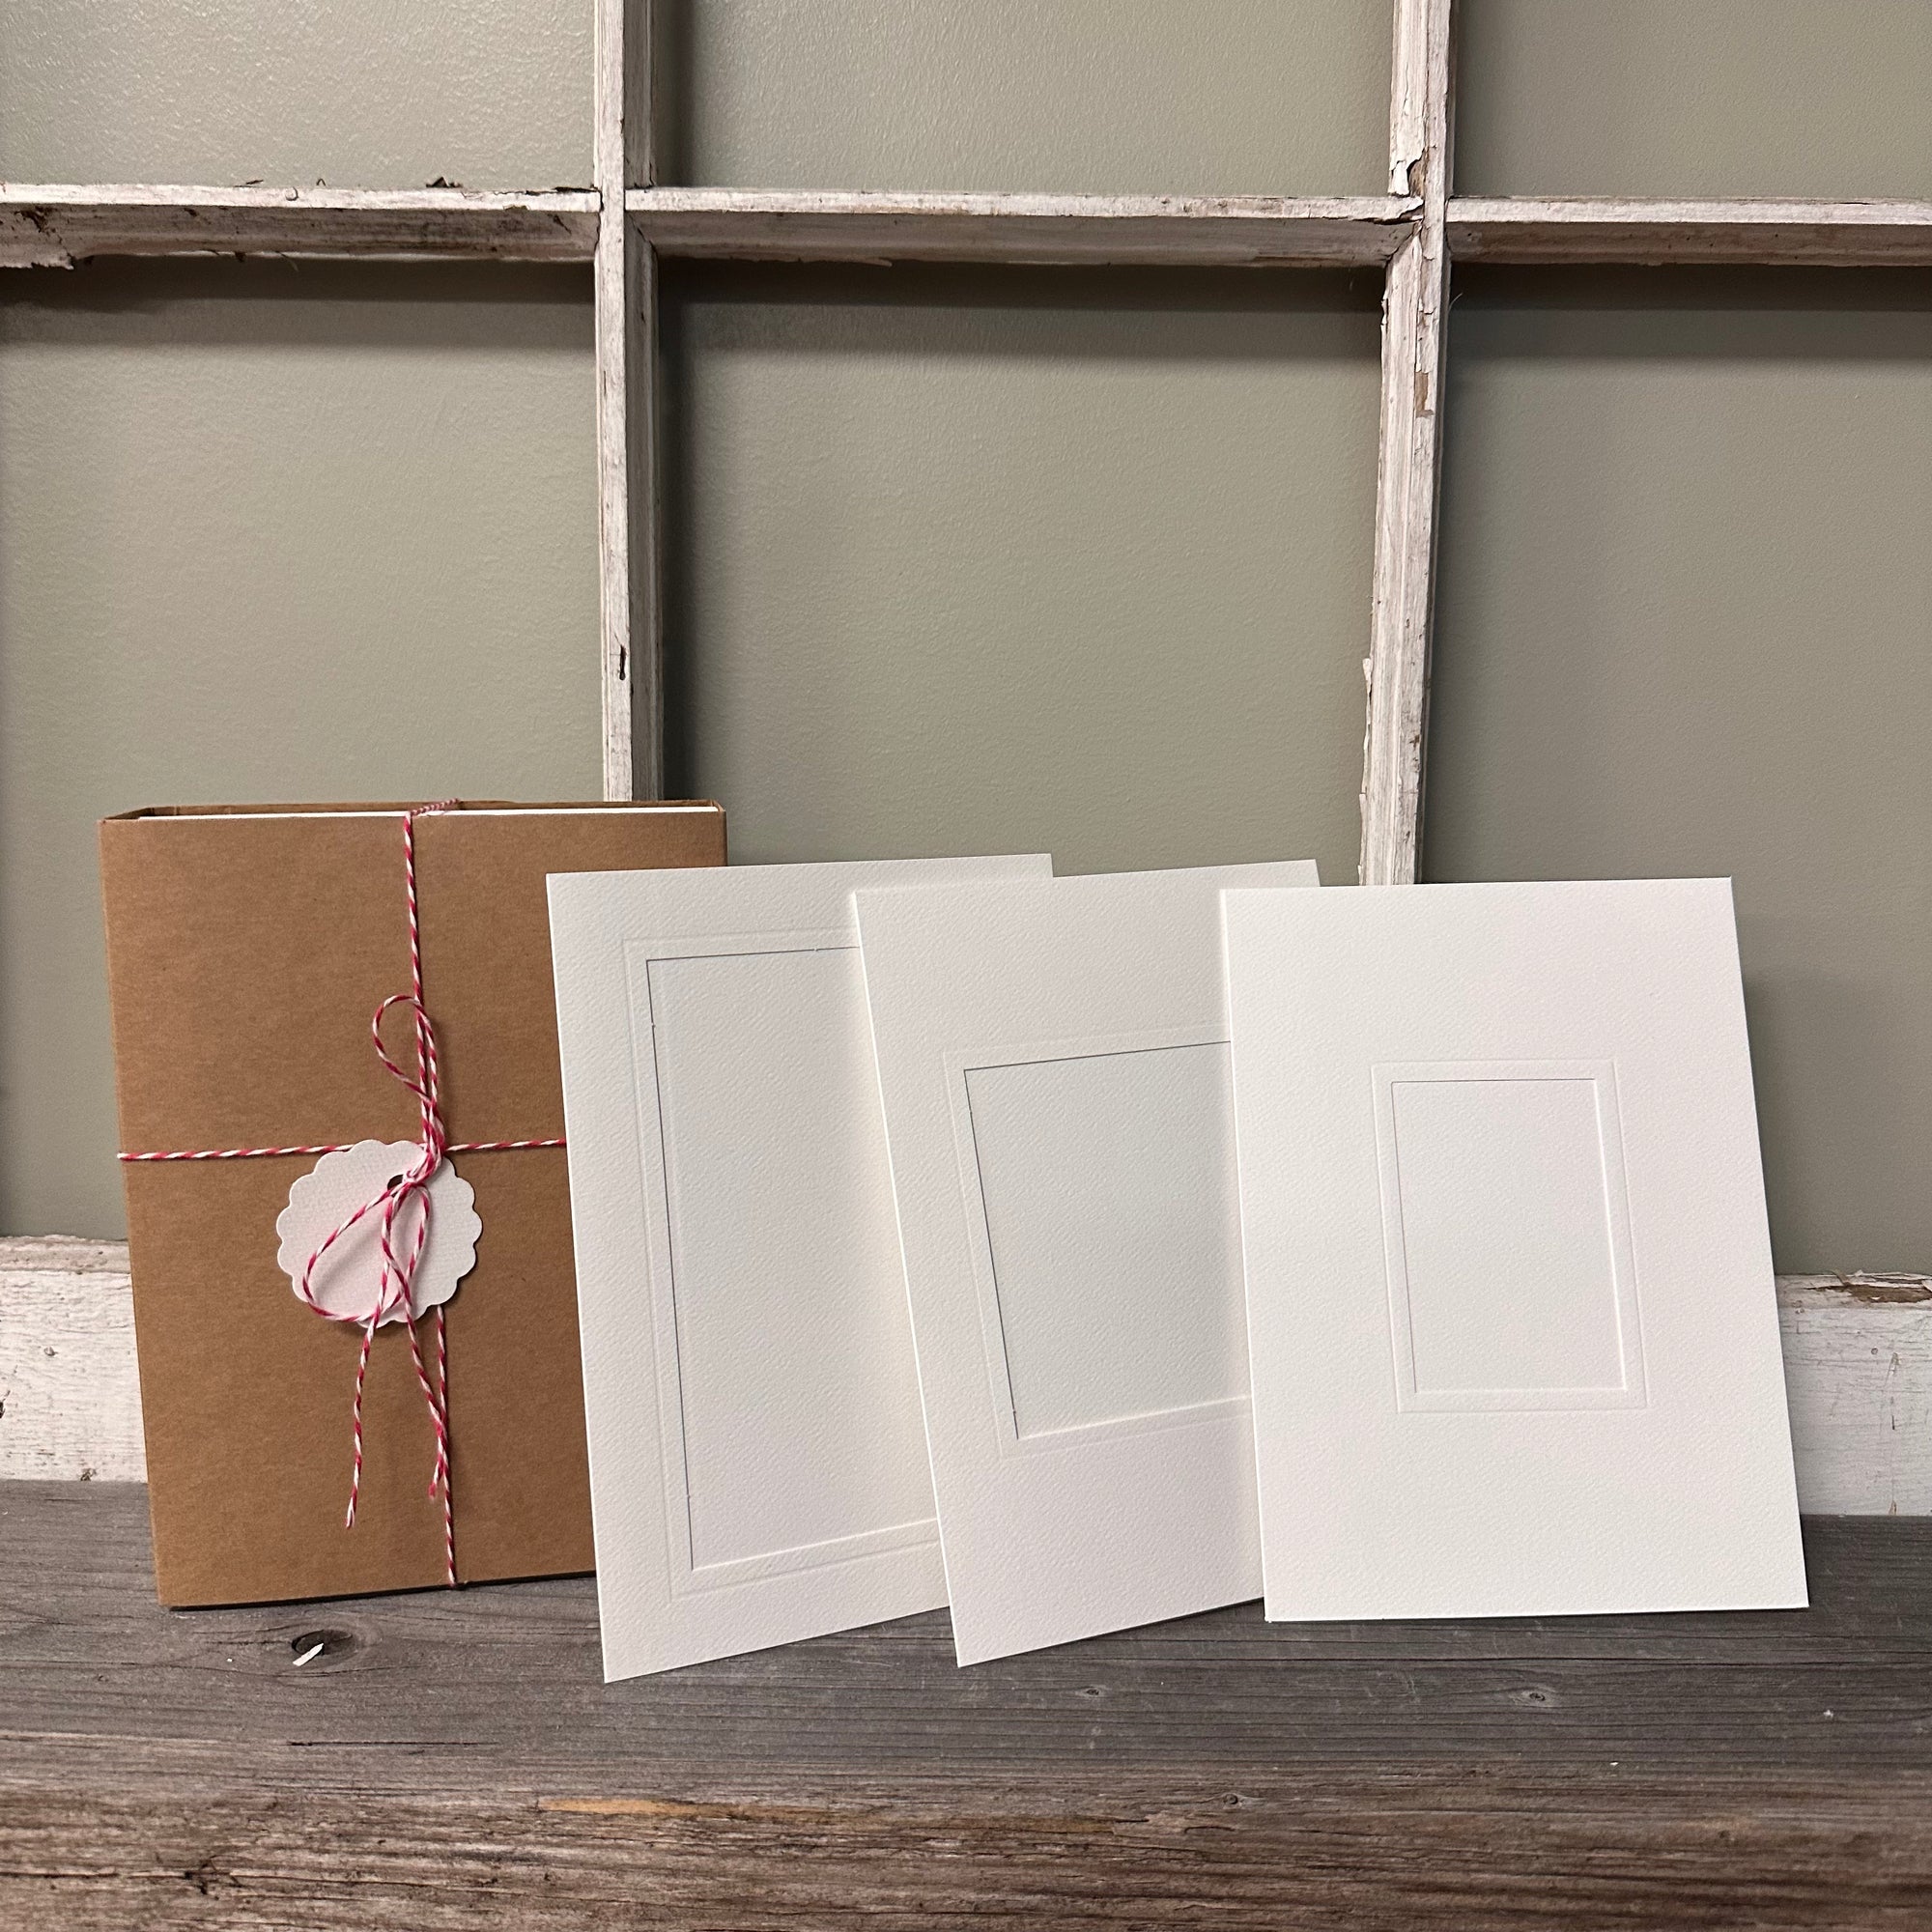 12 Snow insert note cards set - 3 window openings